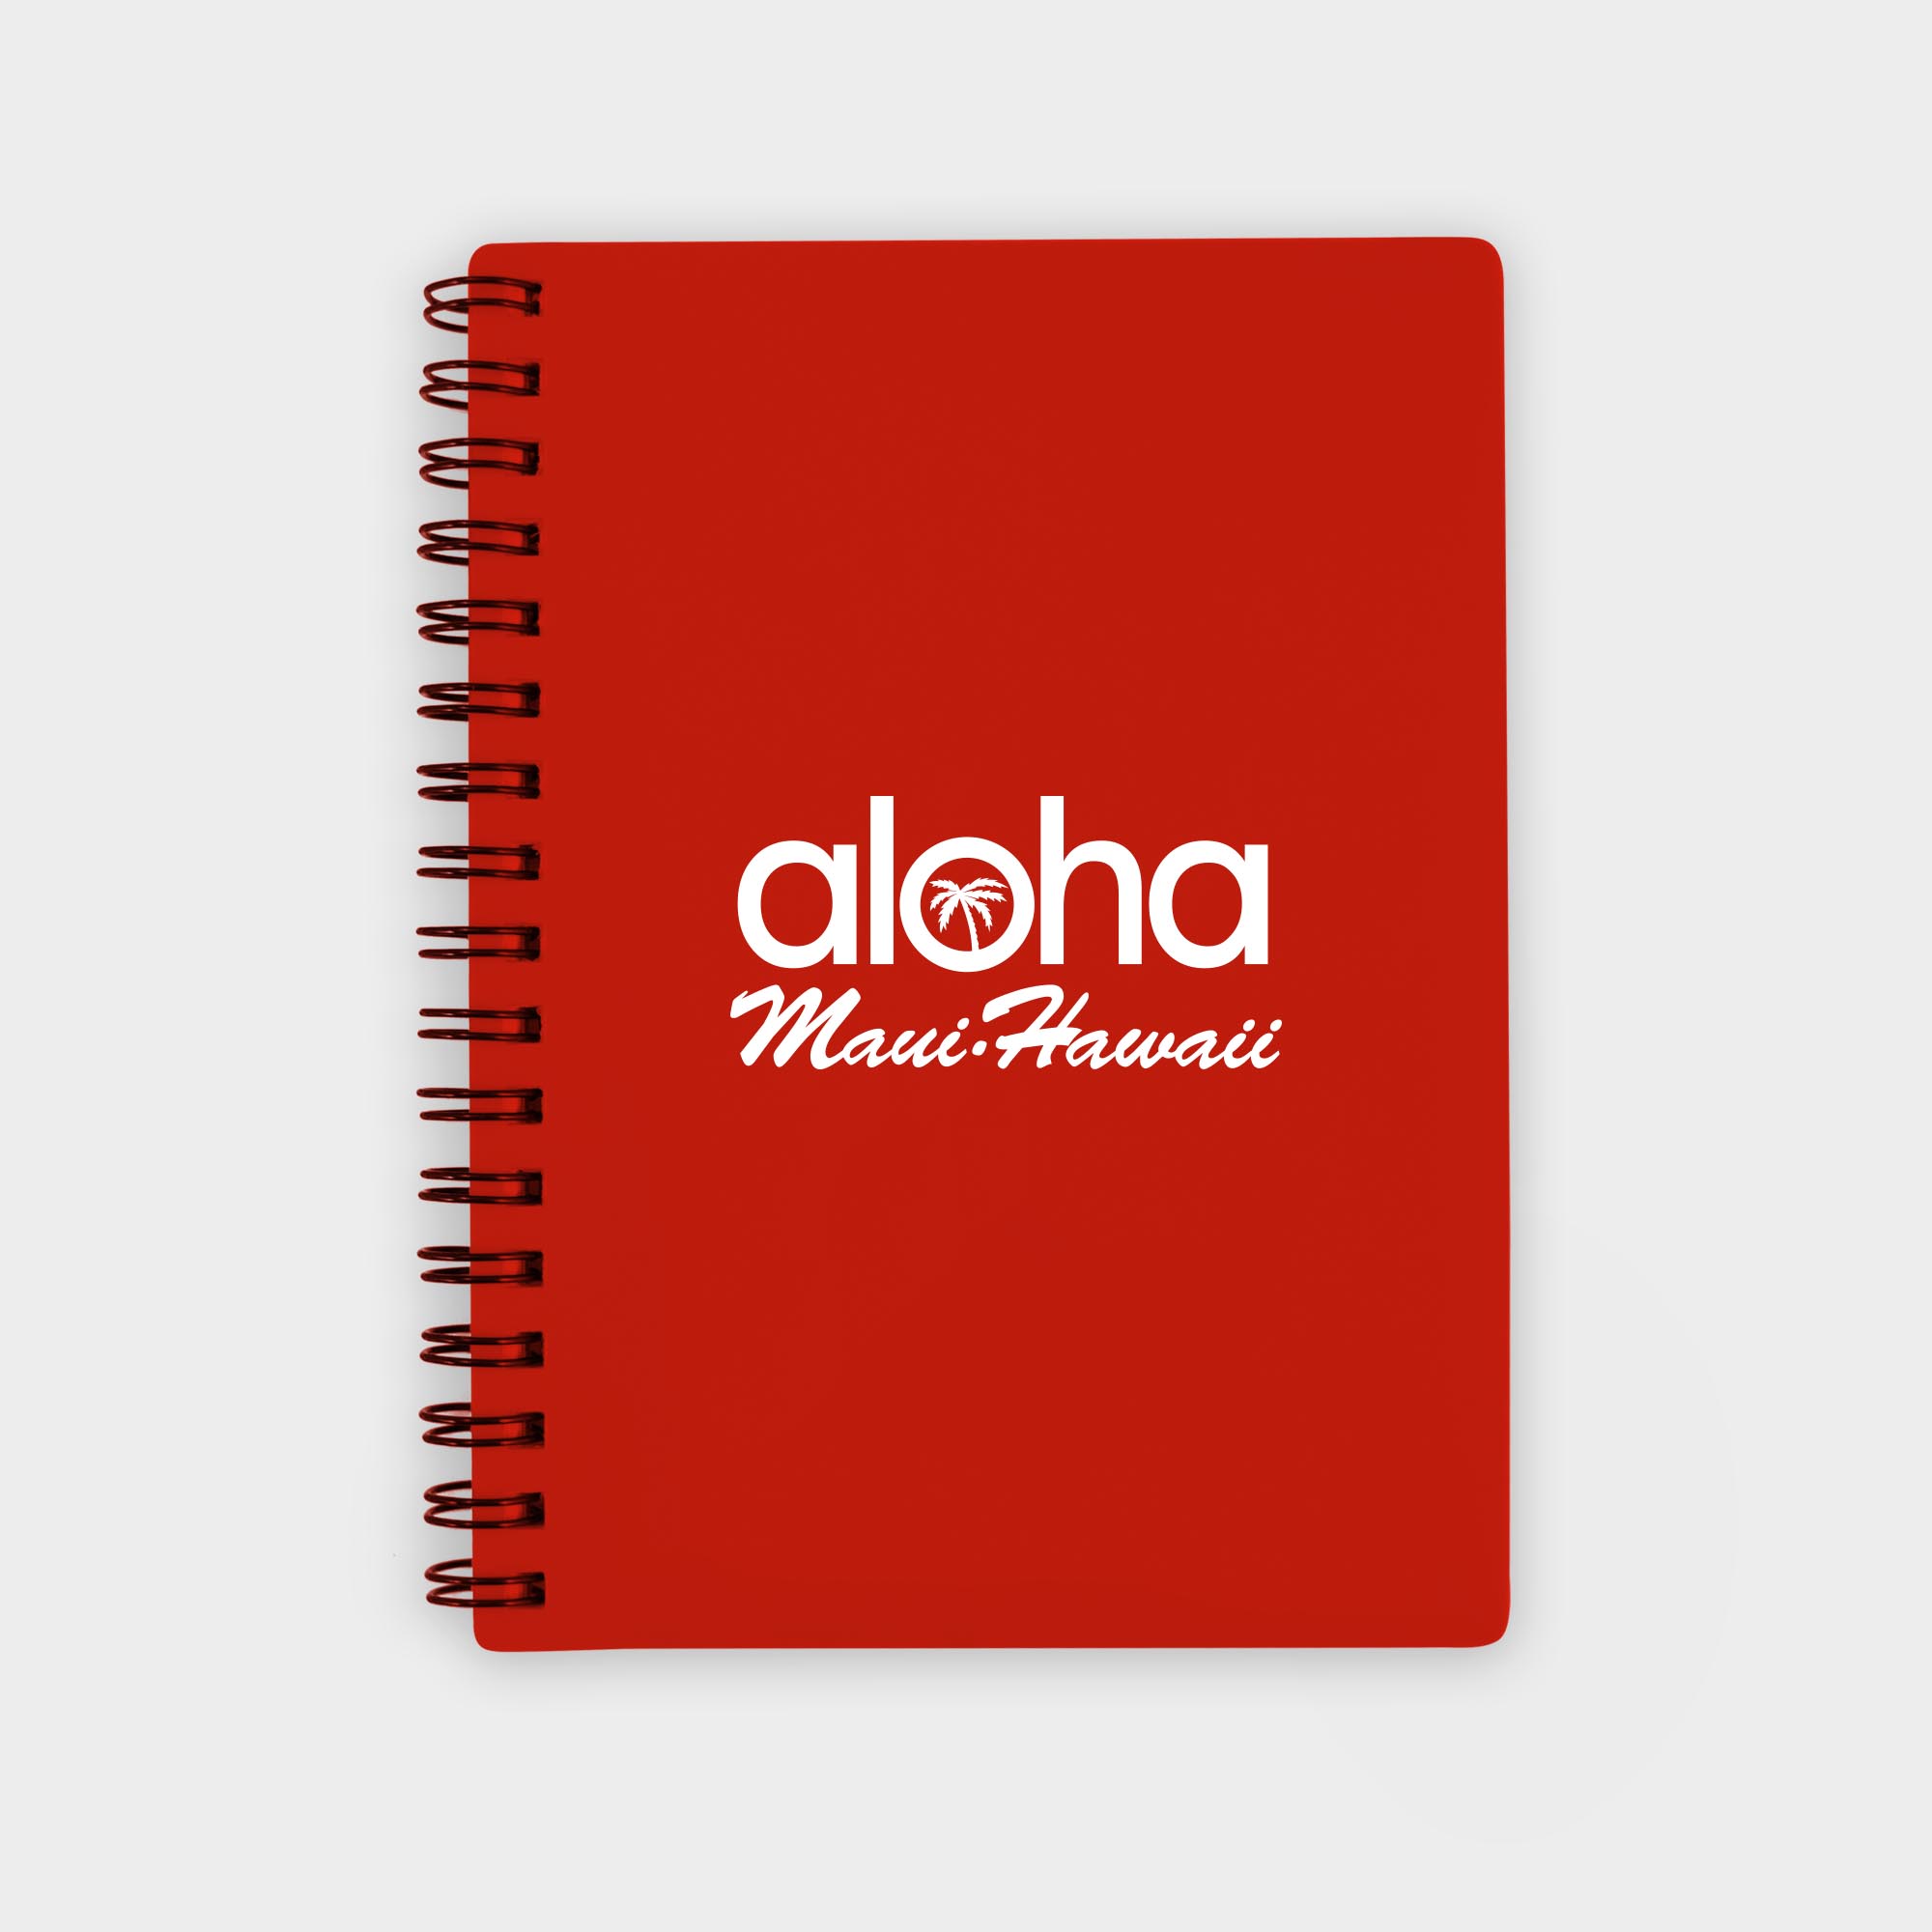 The Green & Good Polypropylene Notebook comes with recycled paper - size A6. The front and back cover is made from recycled polypropylene (500 microns), the sheets are 80gsm. Comes wirebound with 50 sheets as standard. Please contact us if you require a bespoke number of sheets. Red